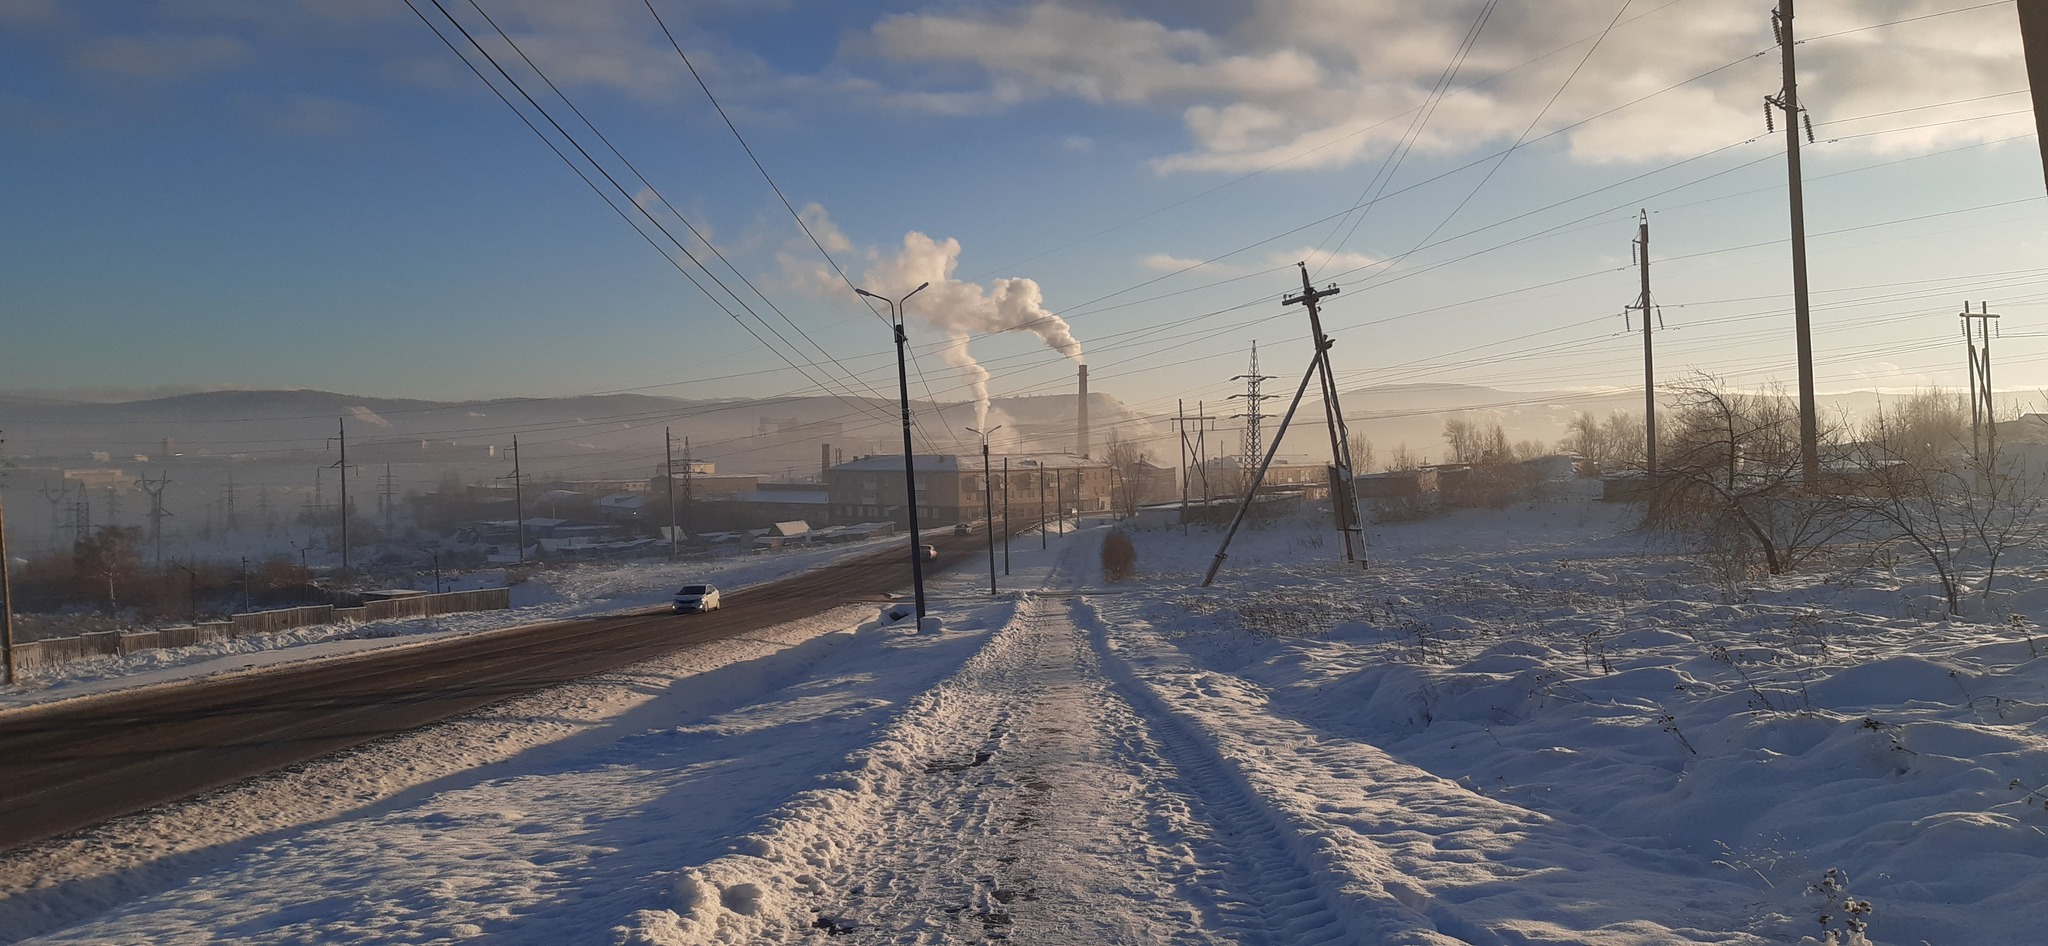 Outskirts of a mountain town - My, Outskirts, Town, Russia, Satka, Chelyabinsk region, Southern Urals, Winter, Mobile photography, Travel across Russia, The photo